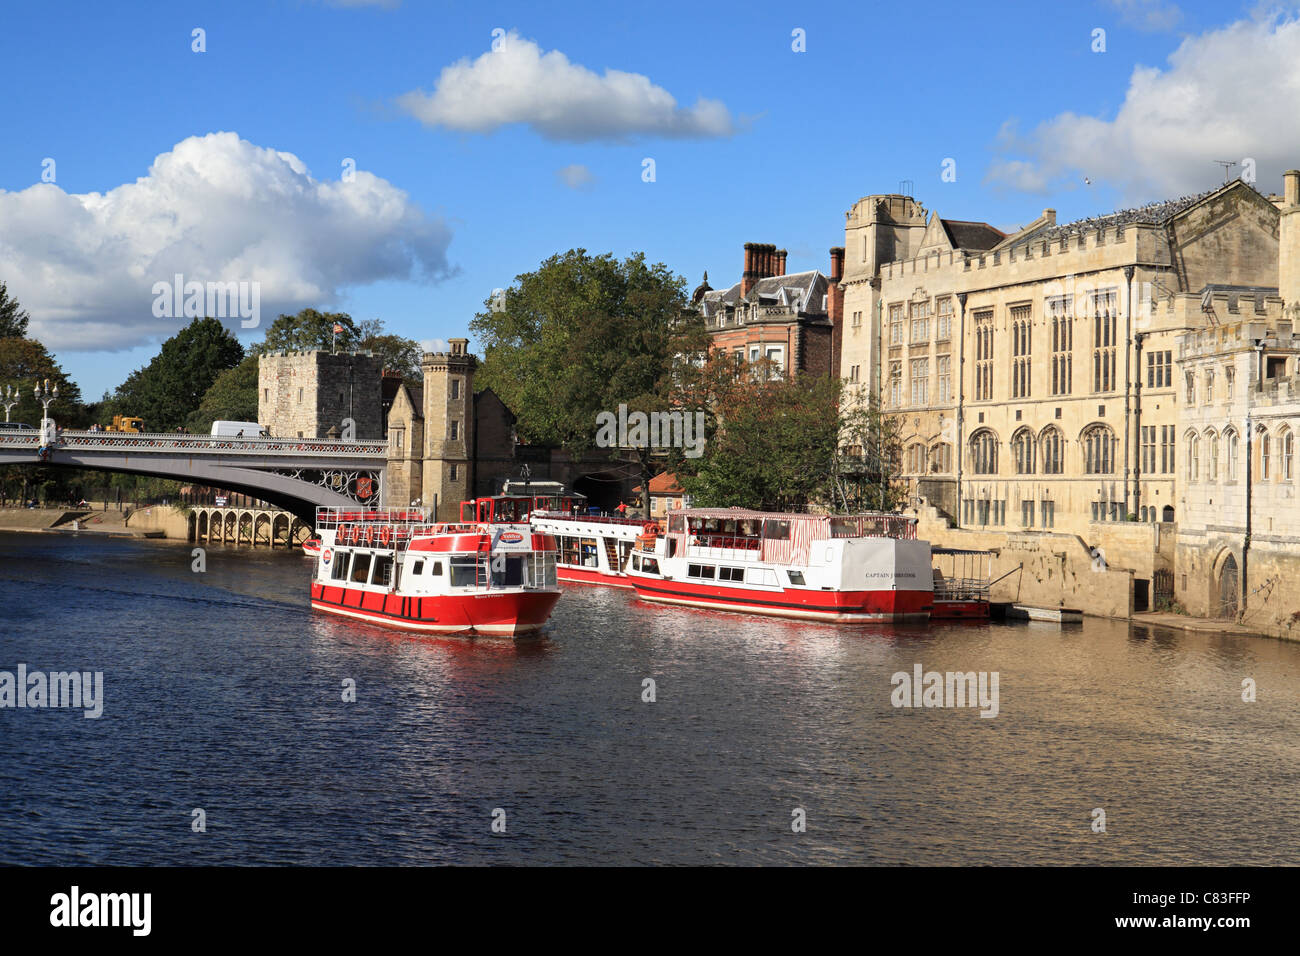 A pleasure boat takes tourists for a trip on the river Ouse, near Lendal Bridge, York, North Yorkshire, England Stock Photo